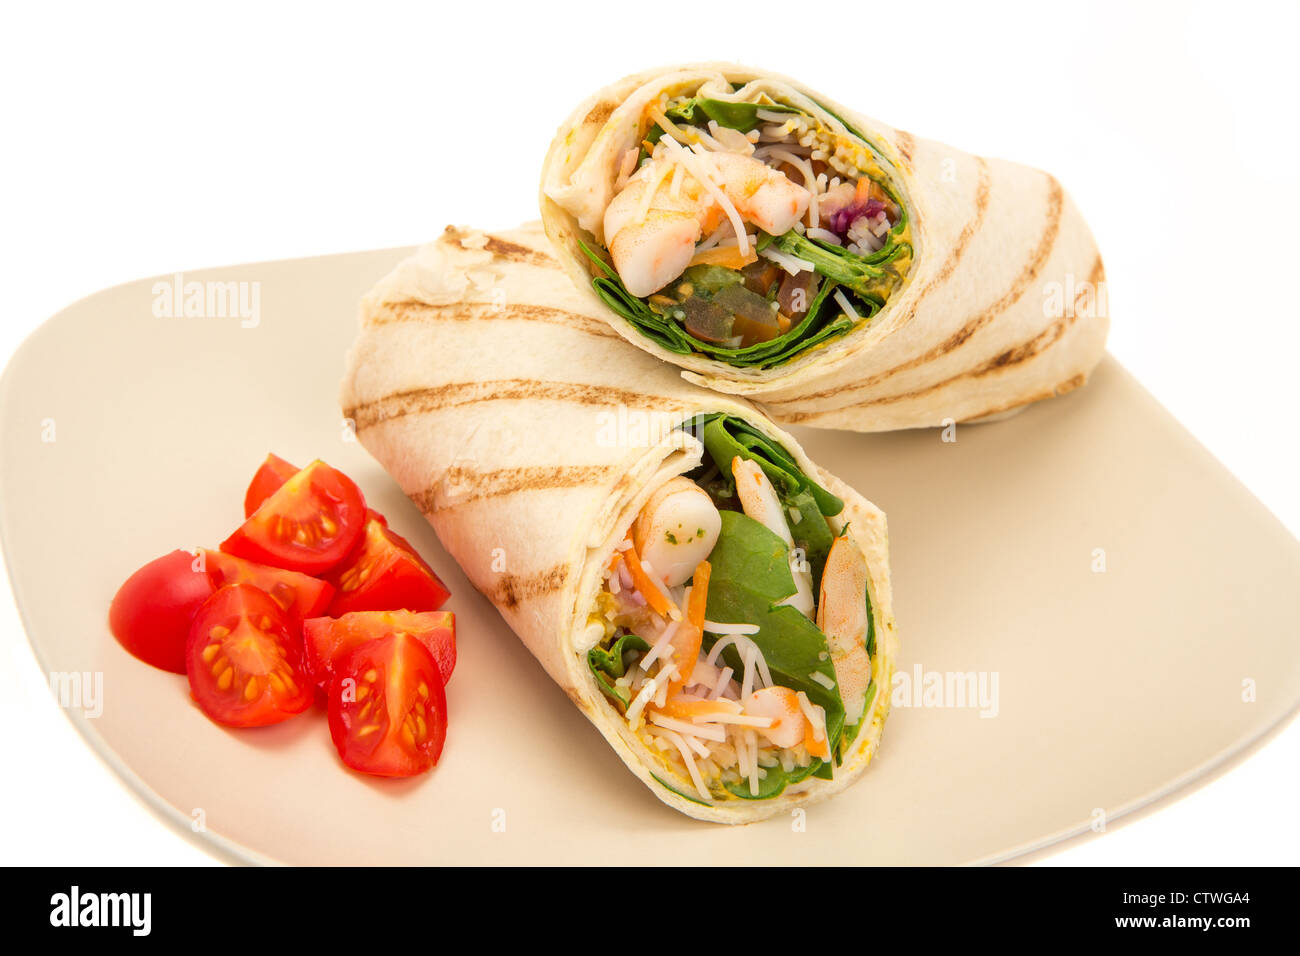 Lime and coriander prawn wrap sandwich with shredded cocunut and fresh lemongrass served on a plate - studio shot Stock Photo